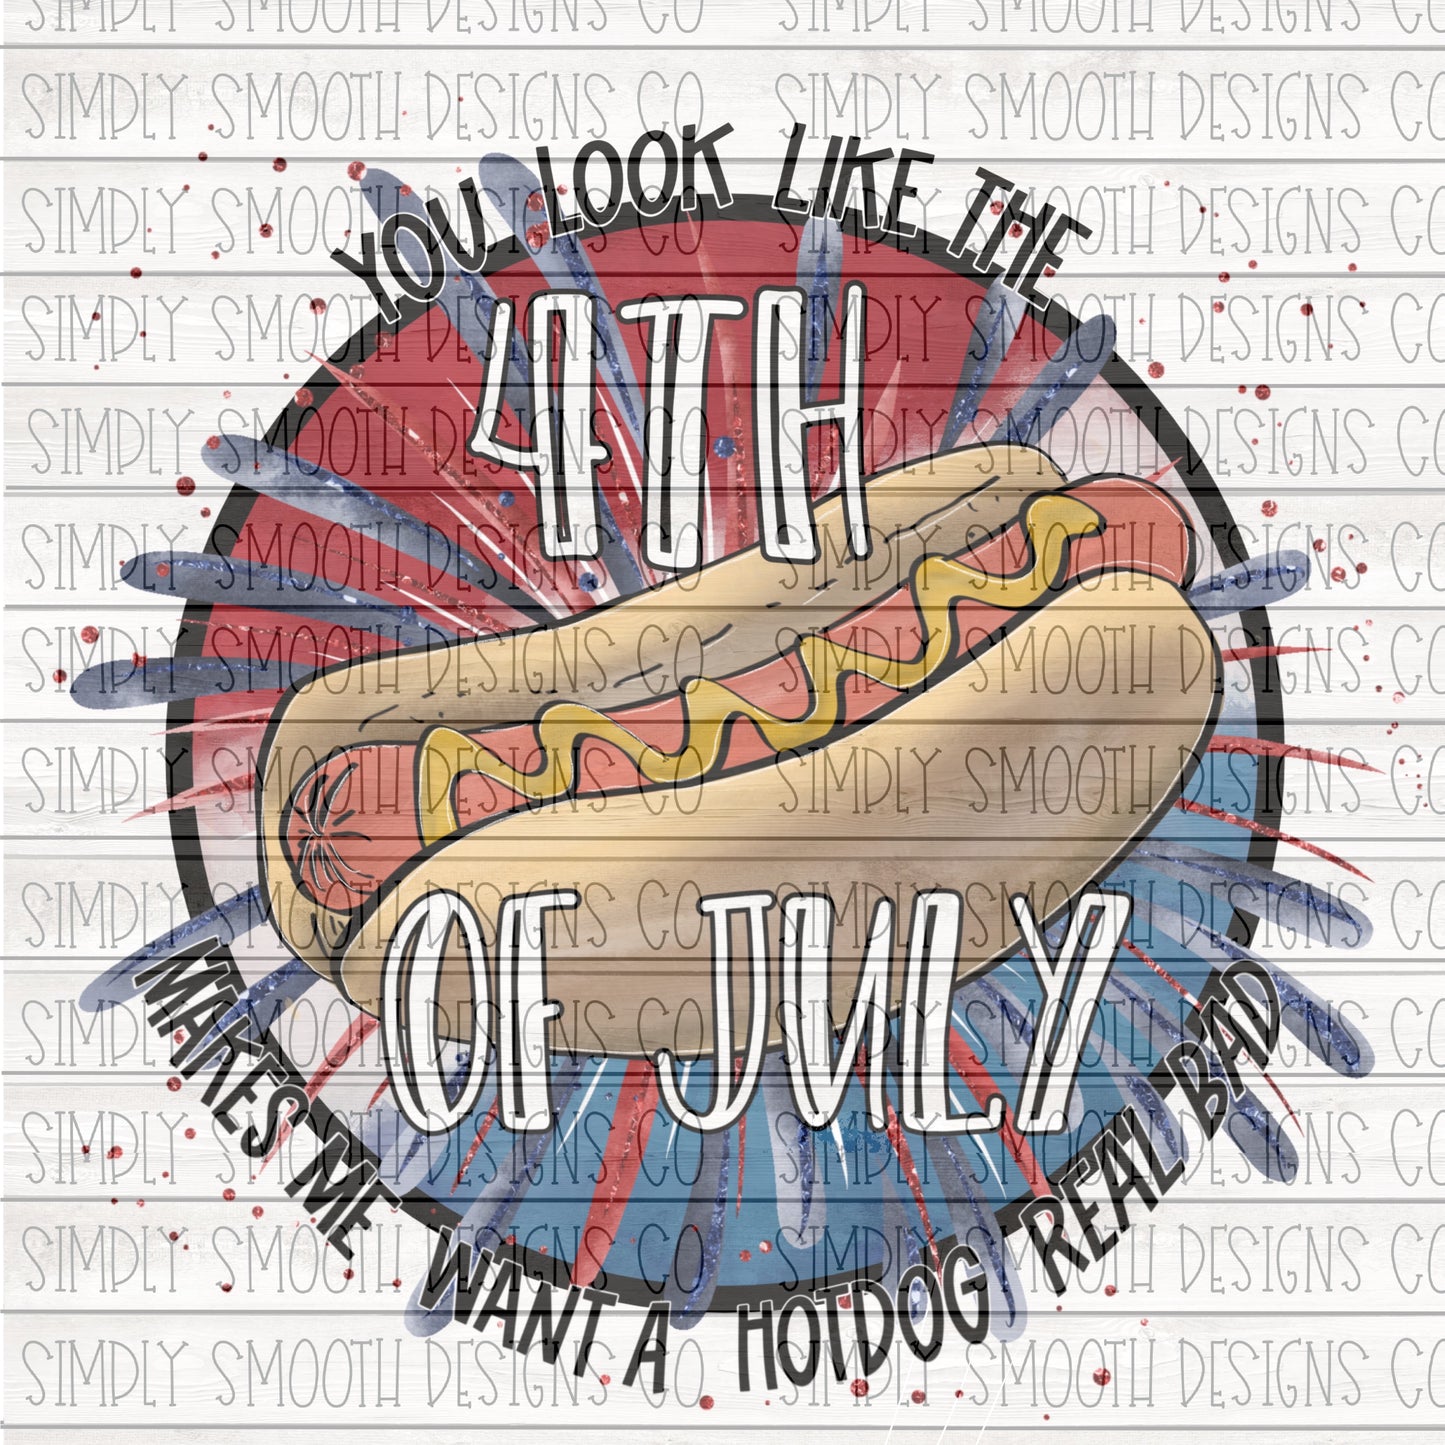 You look like the 4th of july makes me want a hotdog real bad